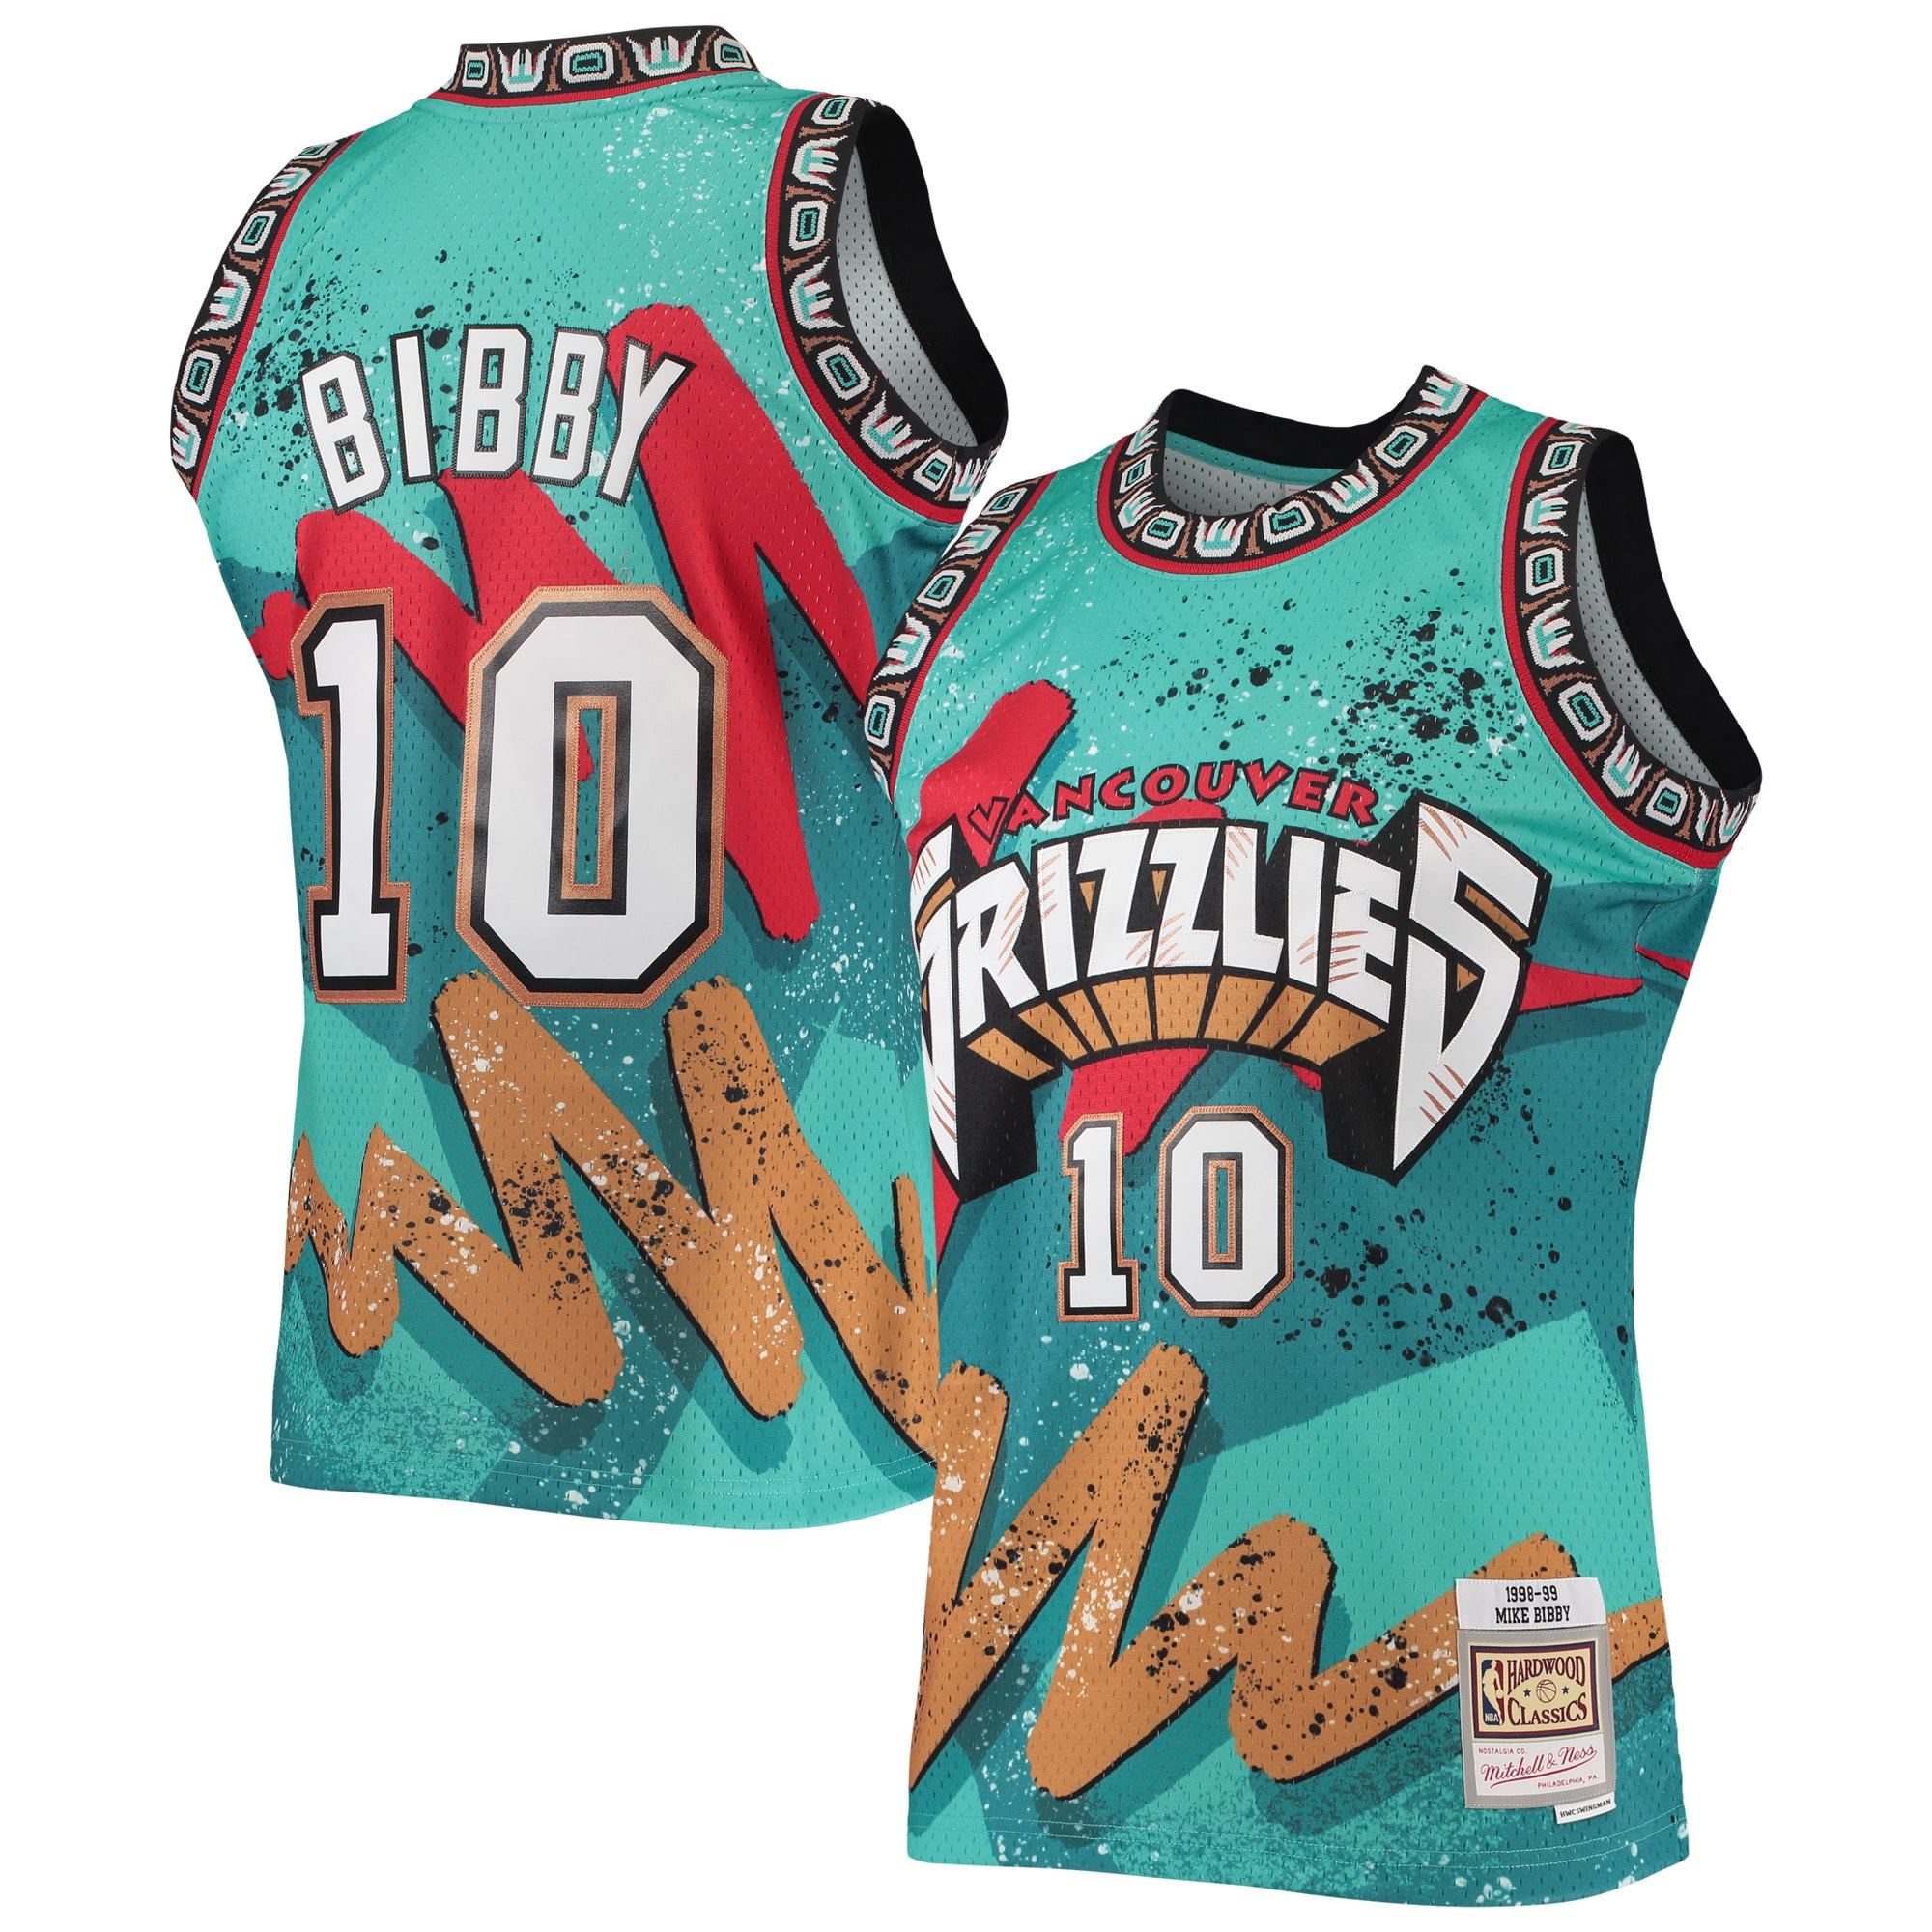 Mike Bibby Vancouver Grizzlies Mitchell and Ness Men's Teal Throwback Jersey